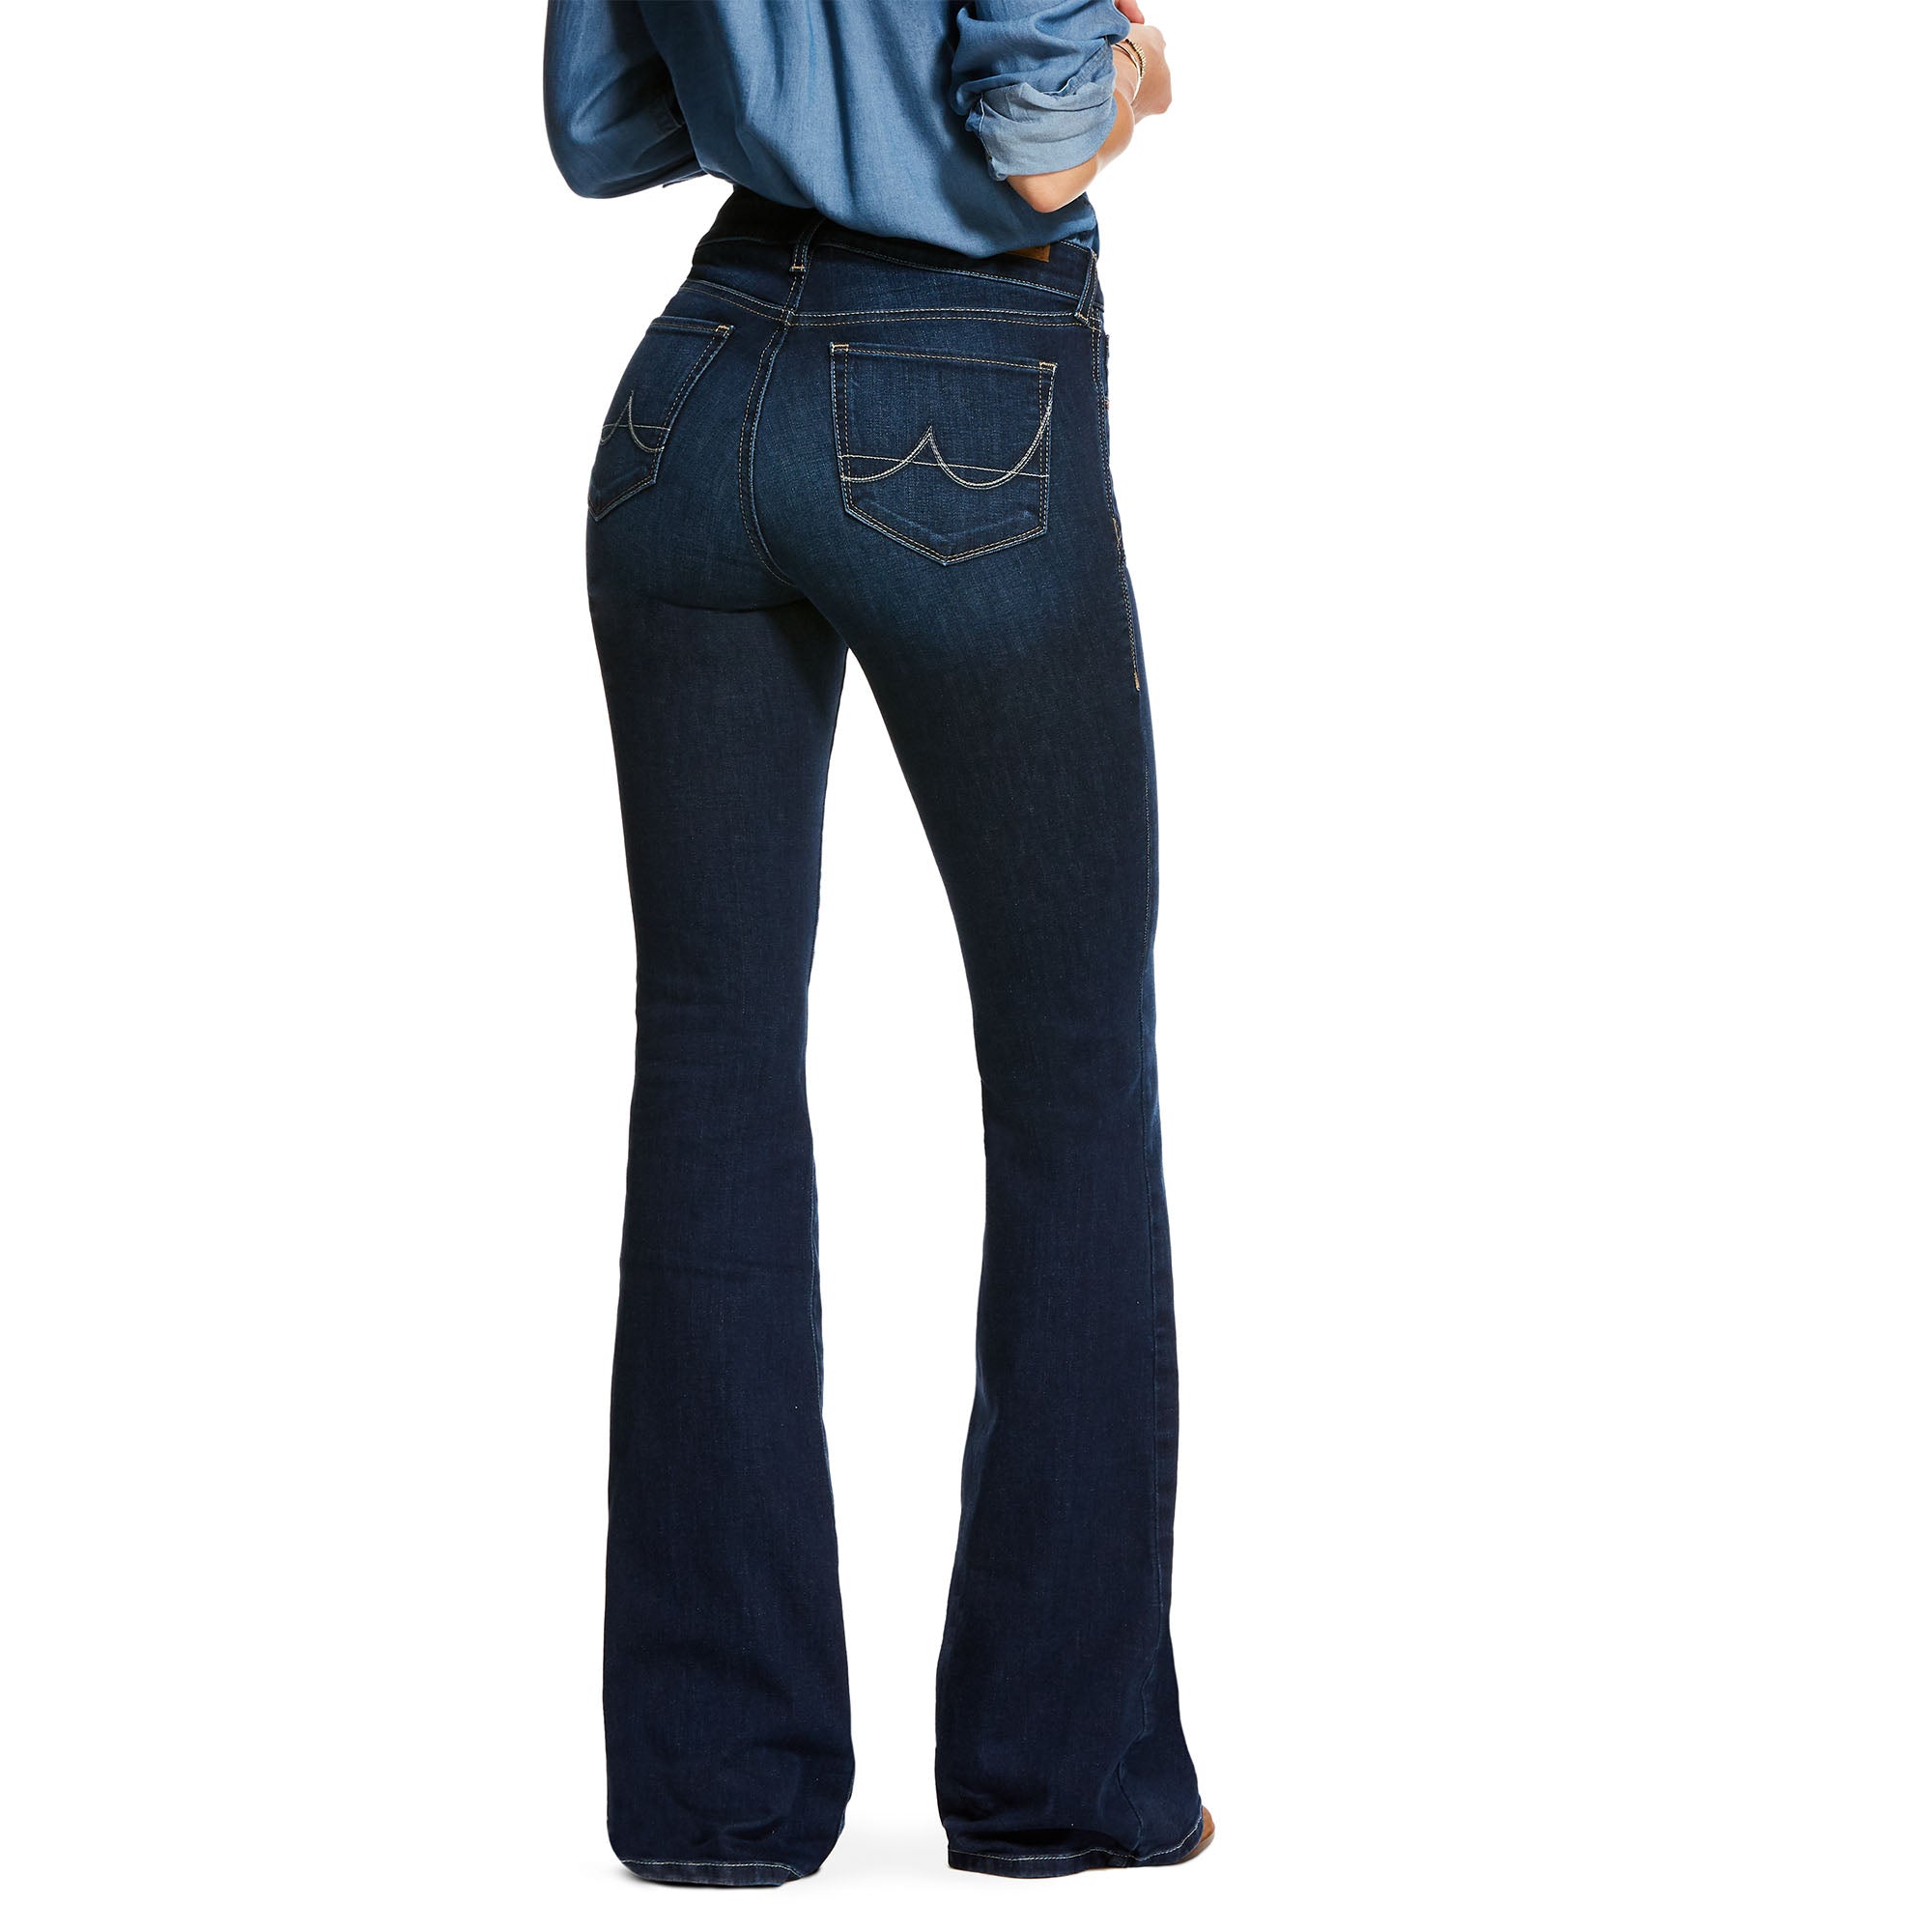 Women's Ariat Katie Flare Jeans back view